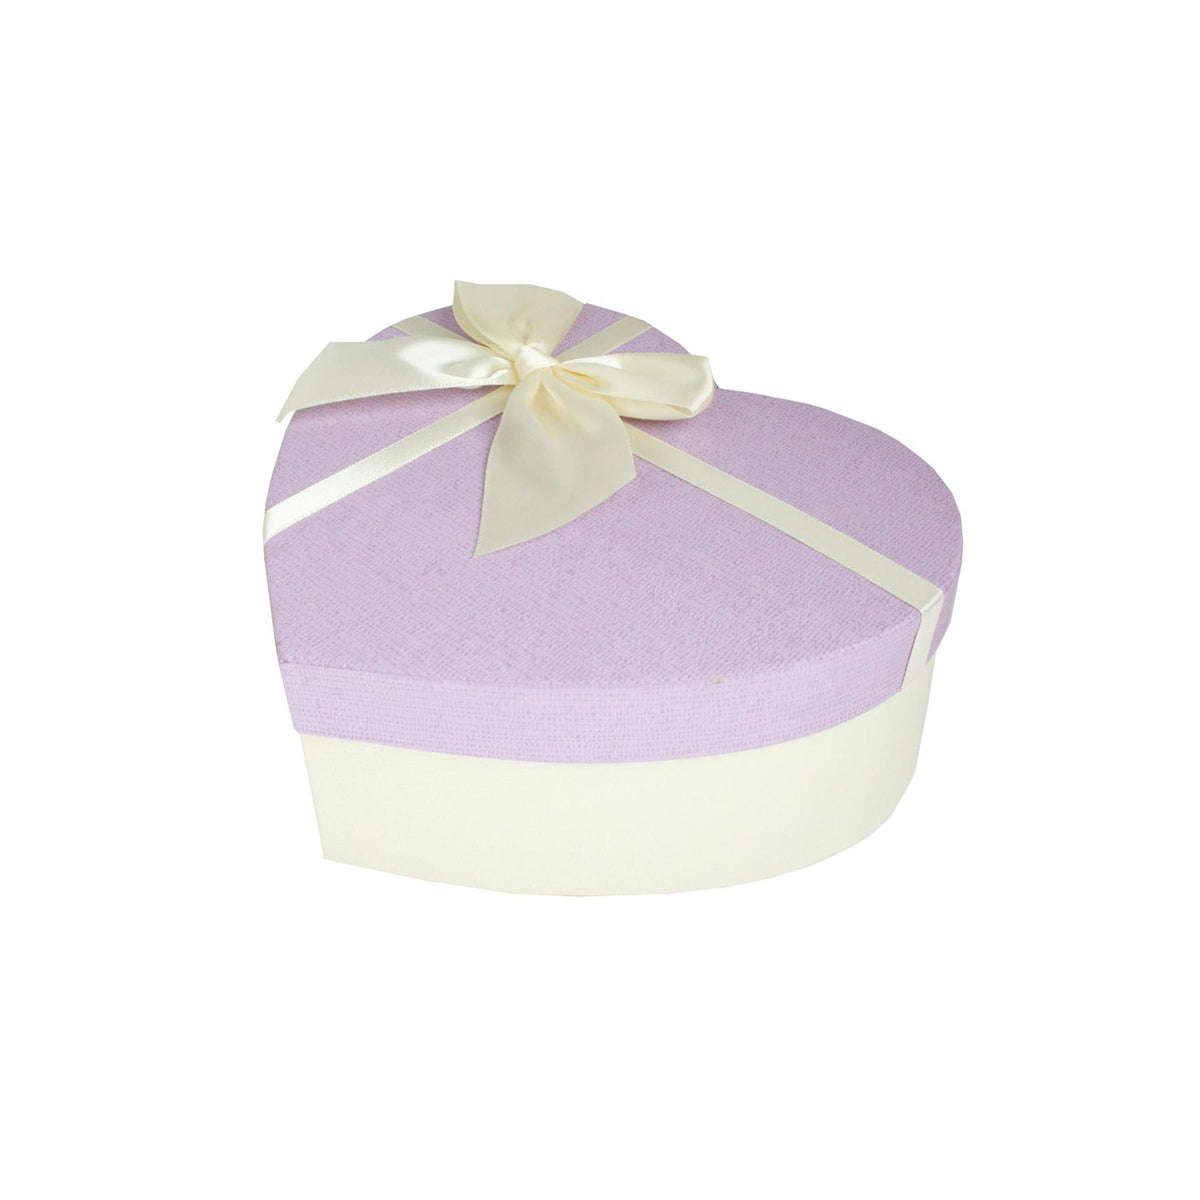 Single White/Lilac Gift Boxes with White Satin Ribbon (Sizes Available)